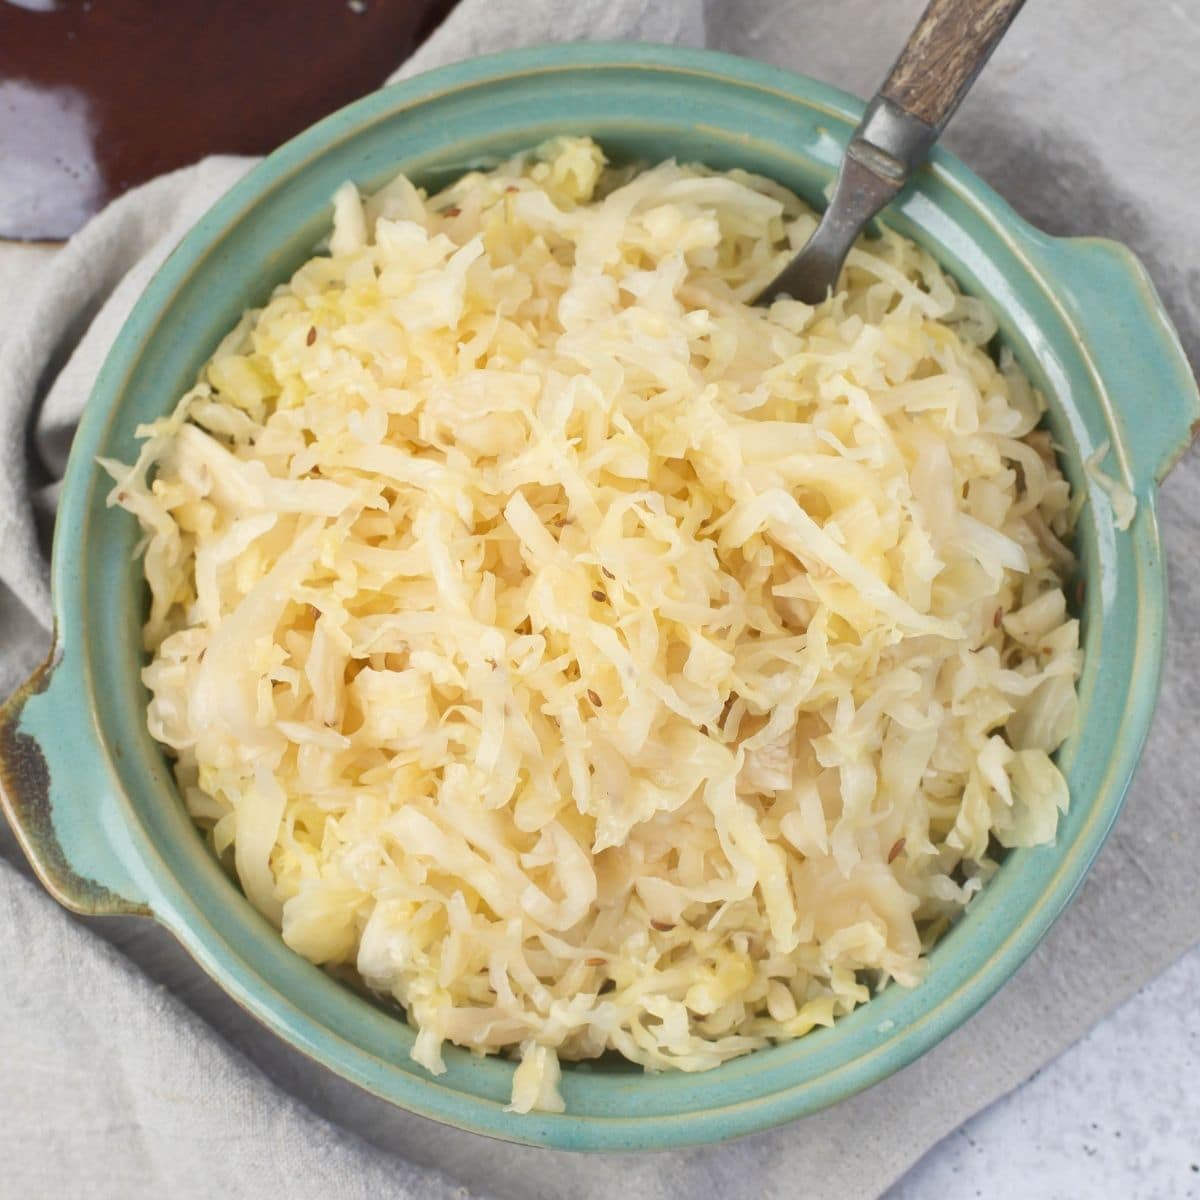 Overhead image of a teal bowl filled with homemade sauerkraut.